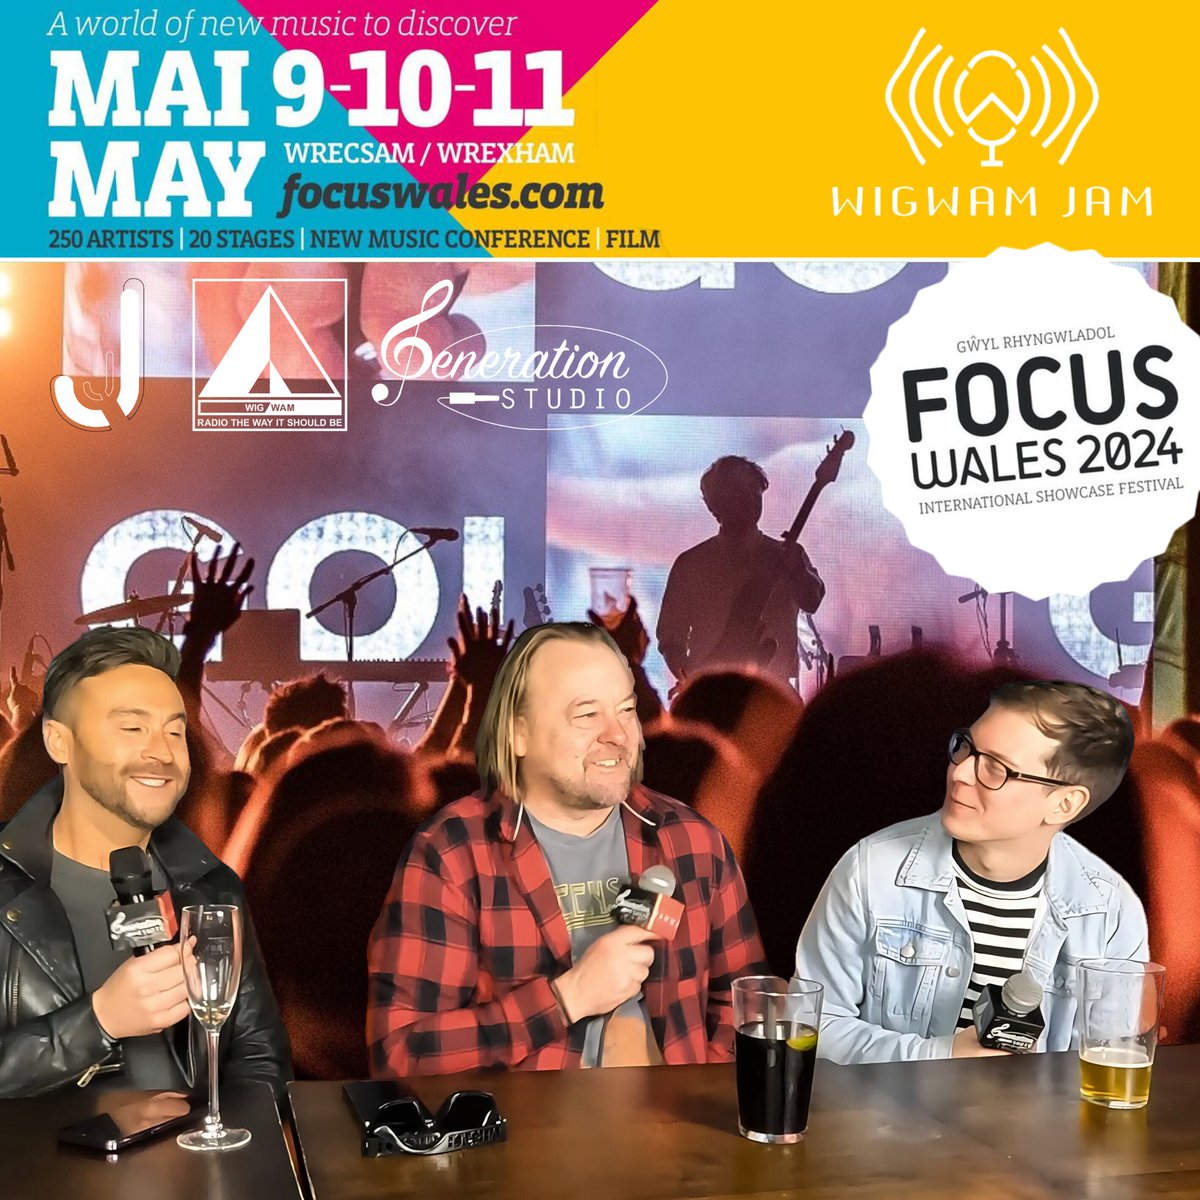 The Wigwam Jam is going to @FocusWales! Join us Friday 10th May 6-8pm at @SaithSeren for this live podcast recording followed by live performances. TIX: focuswales.com/tickets Come join our very own DJs @seedsroy & @MartynPmusic along with @Jamma & @deangeneration as usual!